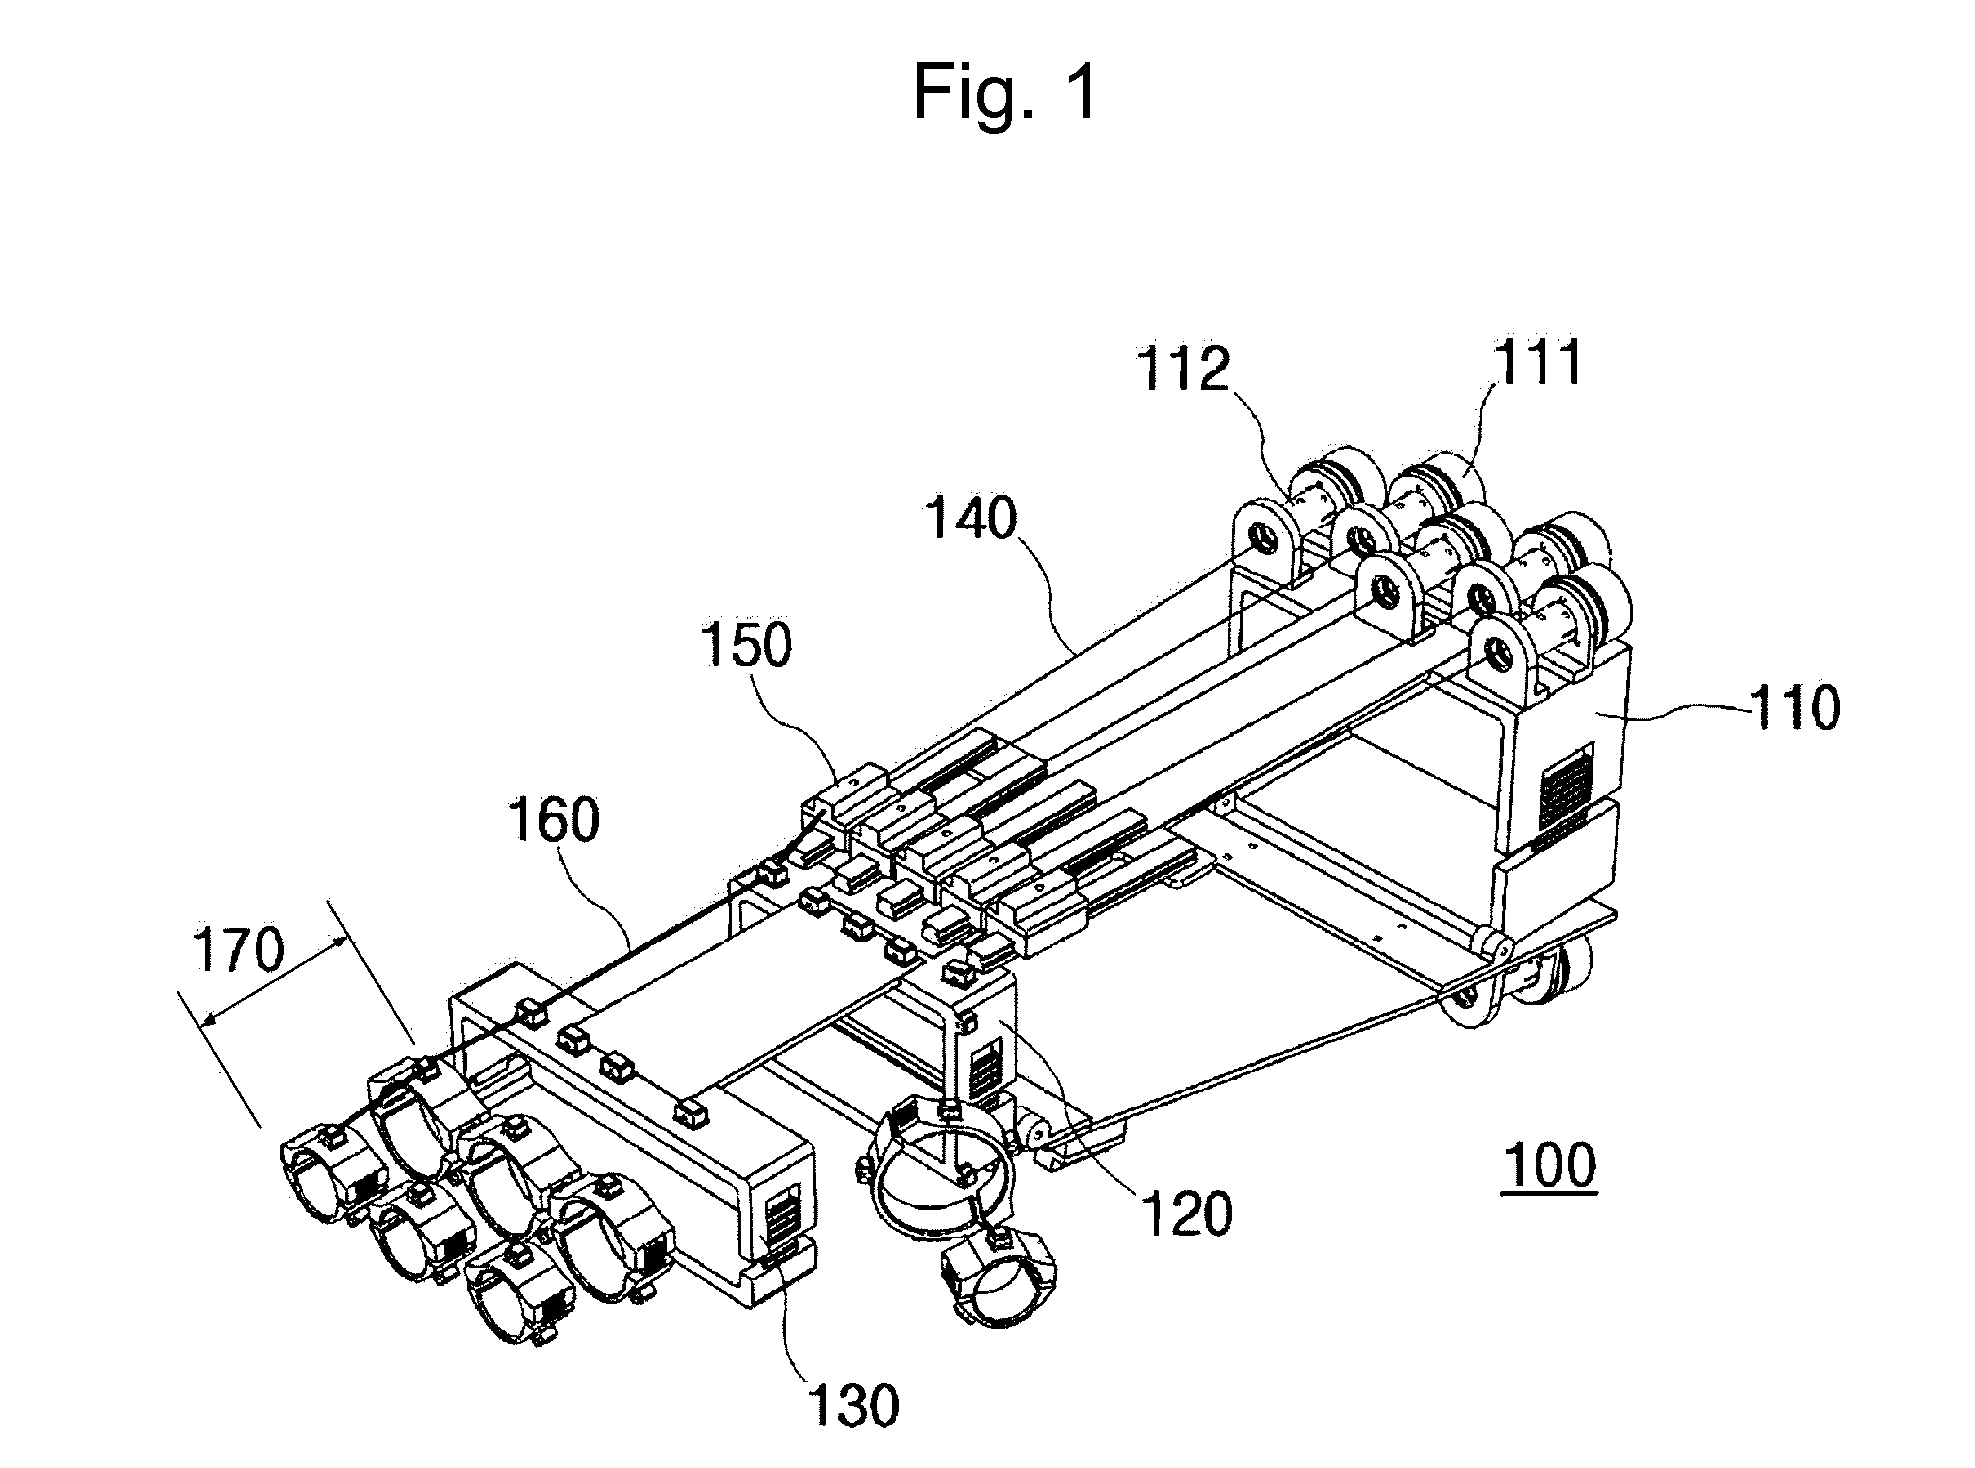 Motion control device based on winding string